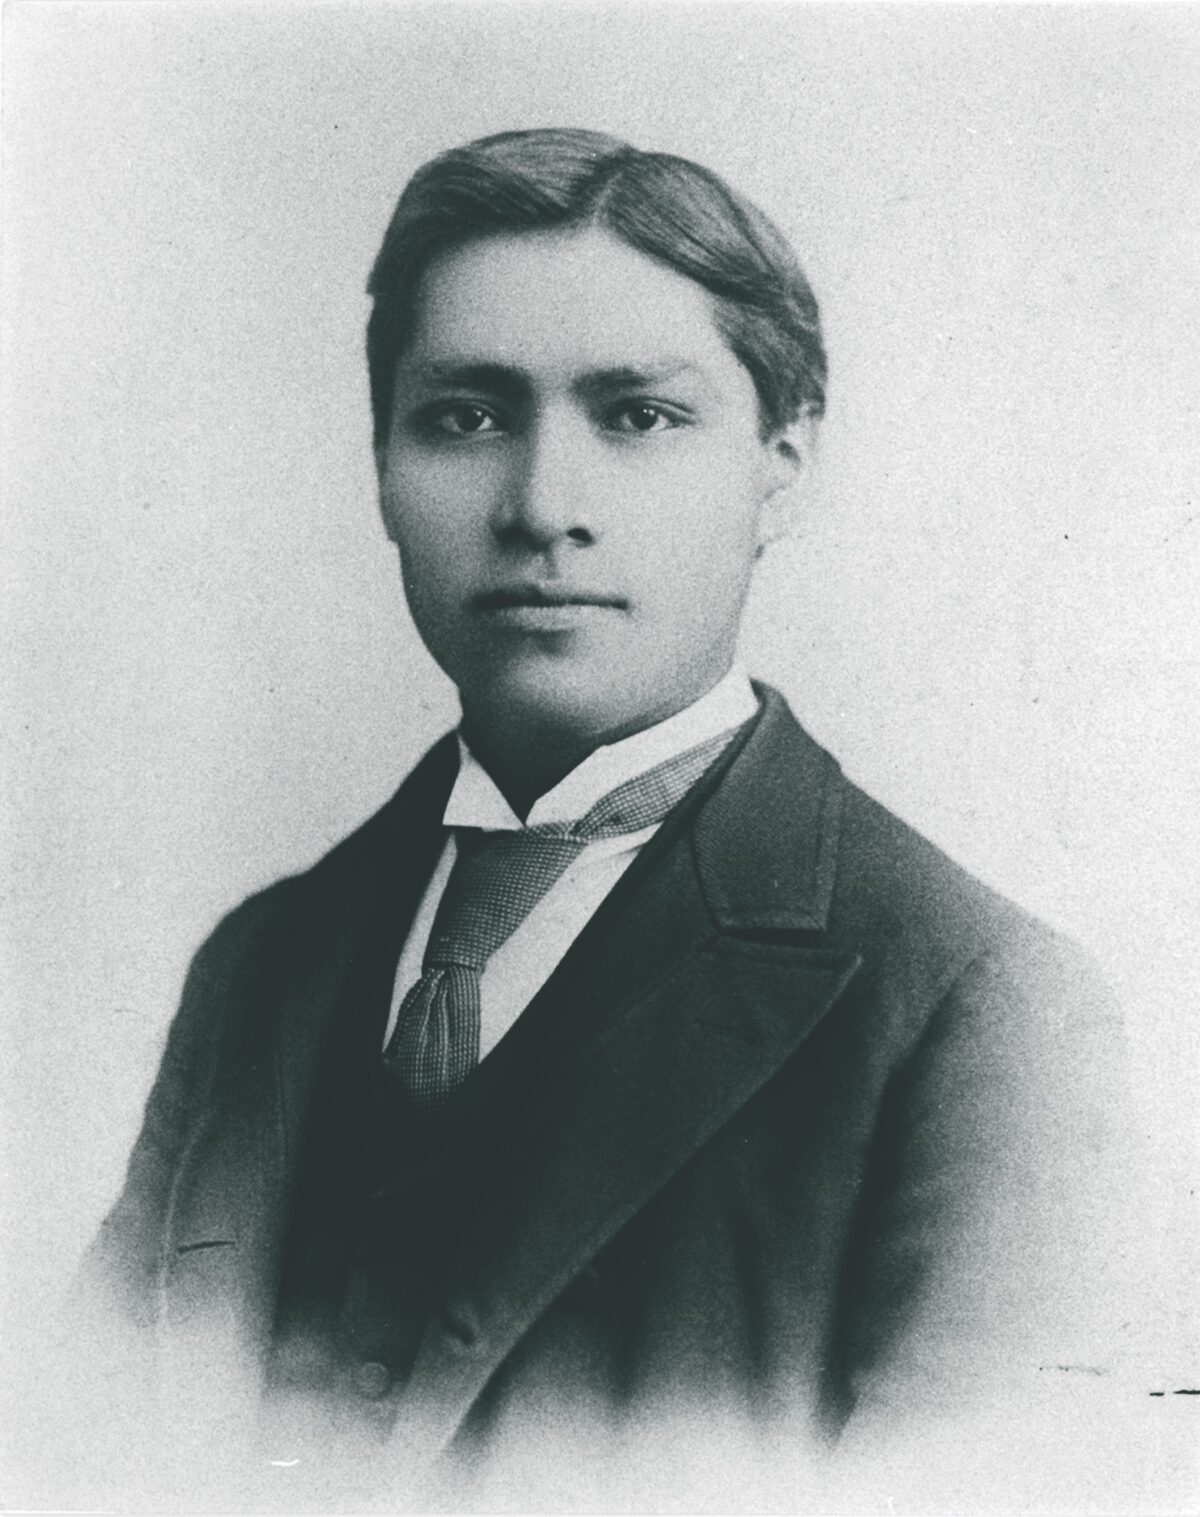 Dr. Montezuma in his early 20s around 1890. (National Archives.)